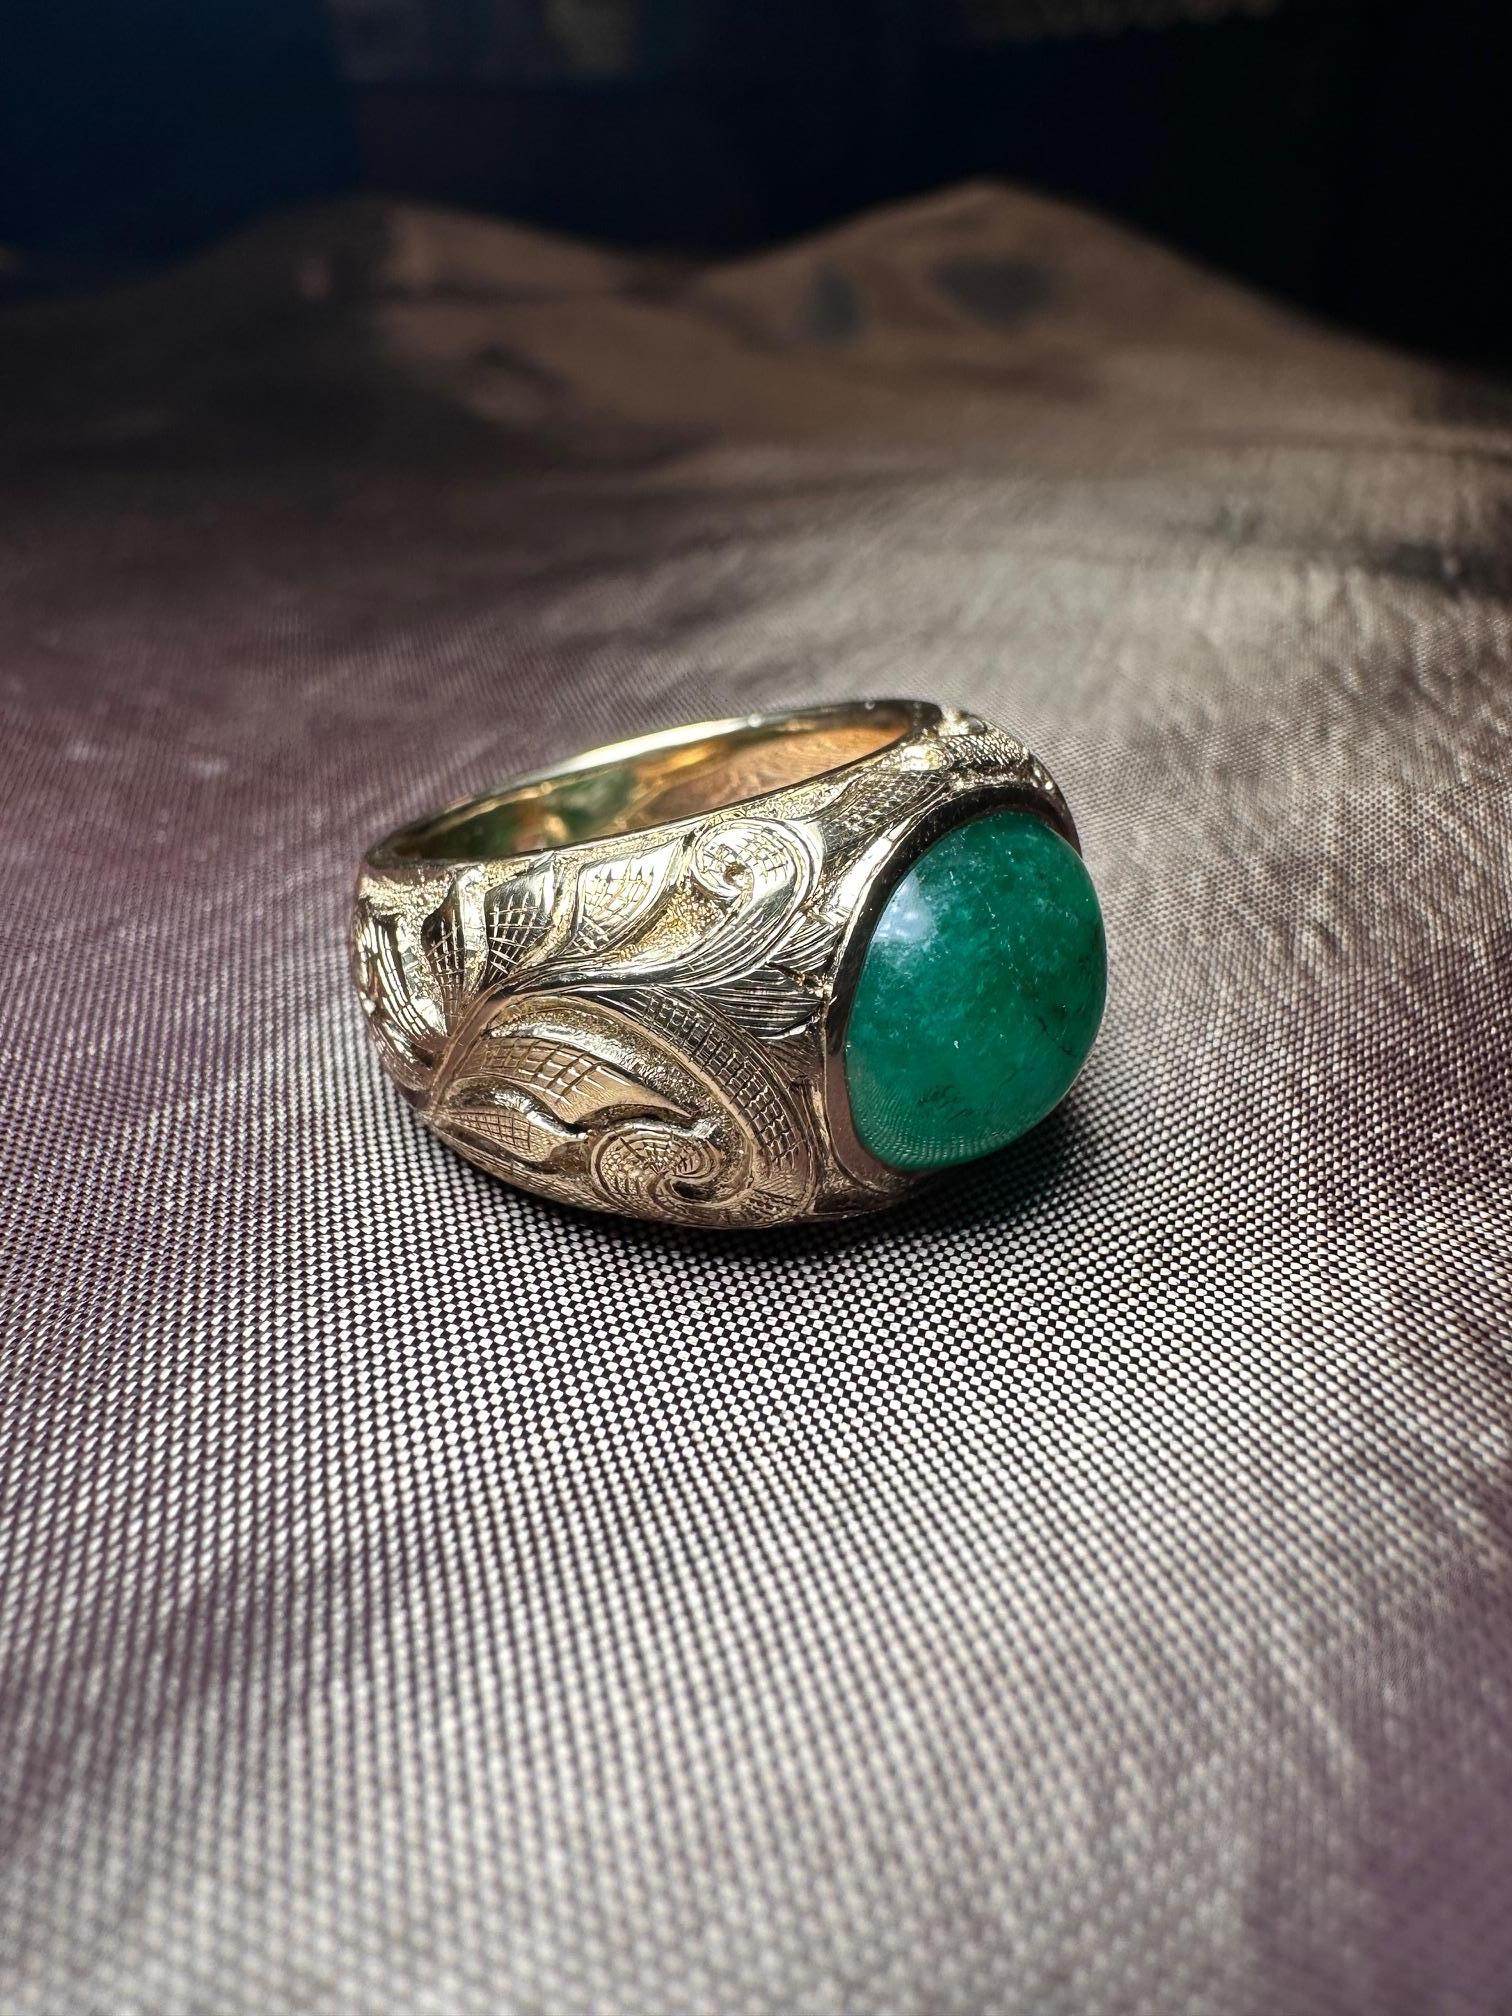 The emerald cabochon is a classic and timeless style, and our version adds a modern touch with its sleek and contemporary design. The emerald itself is of the highest quality, with its rich green color and beautiful clarity. The stone is set in 18k